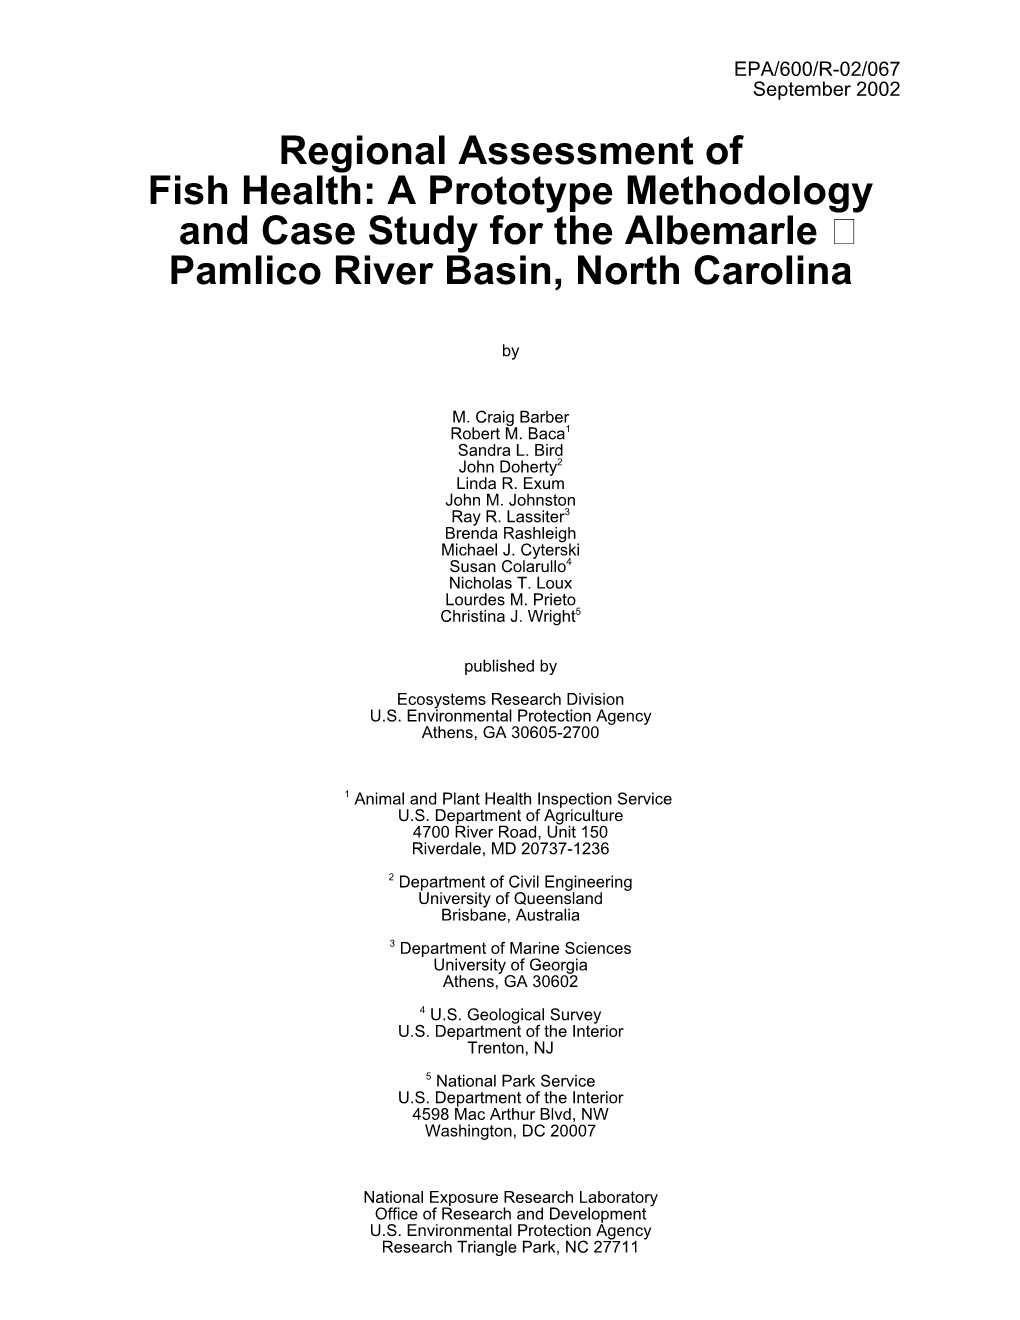 Regional Assessment of Fish Health: a Prototype Methodology and Case Study for the Albemarle � Pamlico River Basin, North Carolina